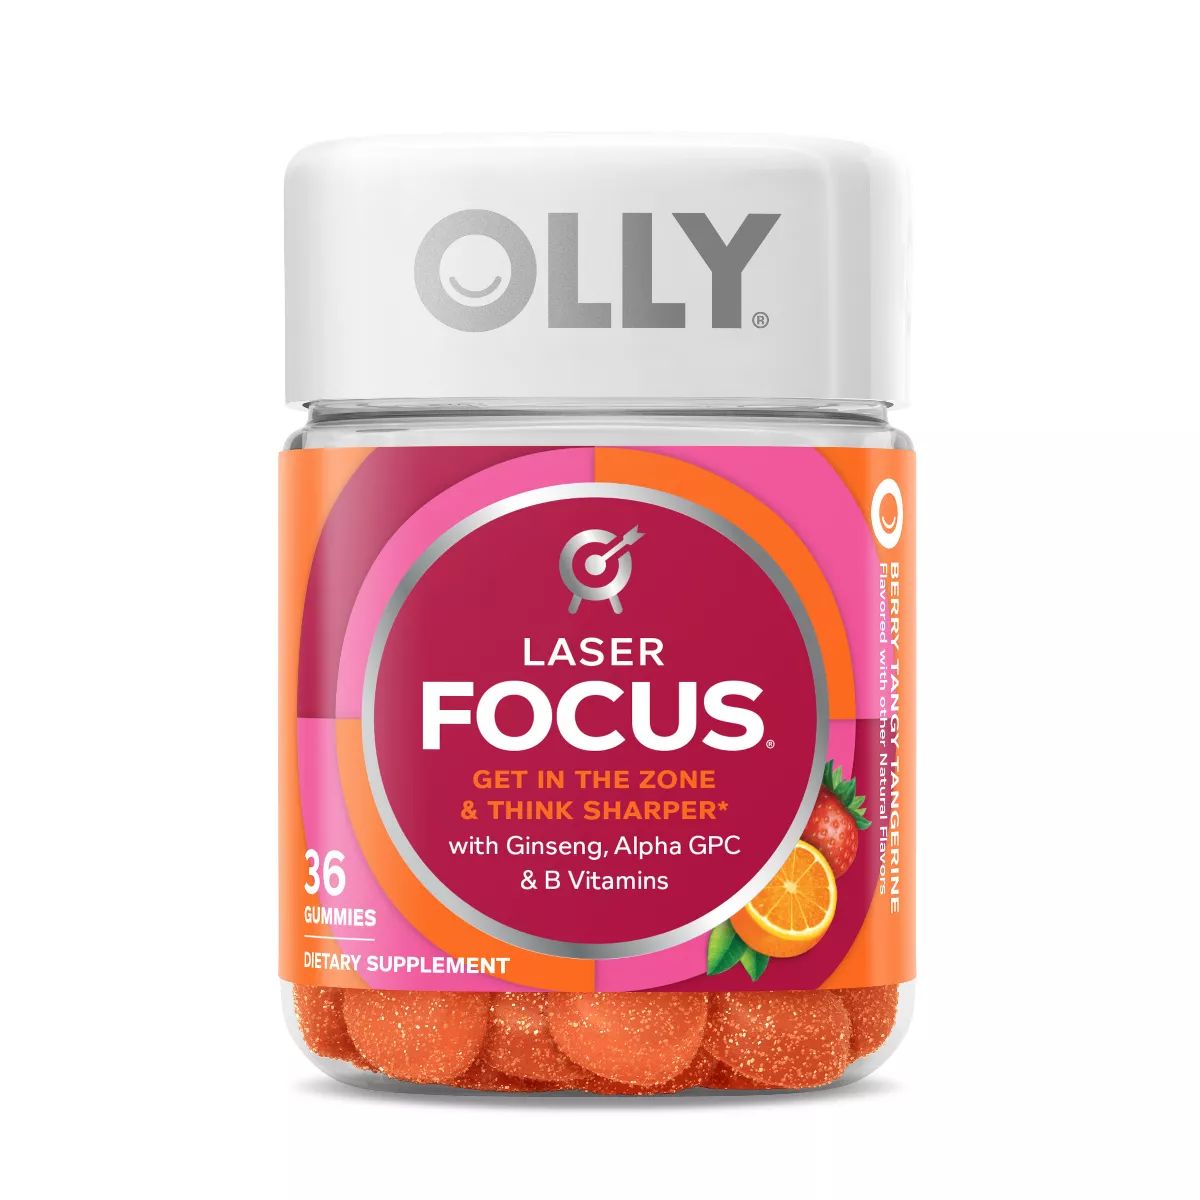 OLLY Laser Focus Gummies - Berry Tangy Tangerine - 36ct | Target